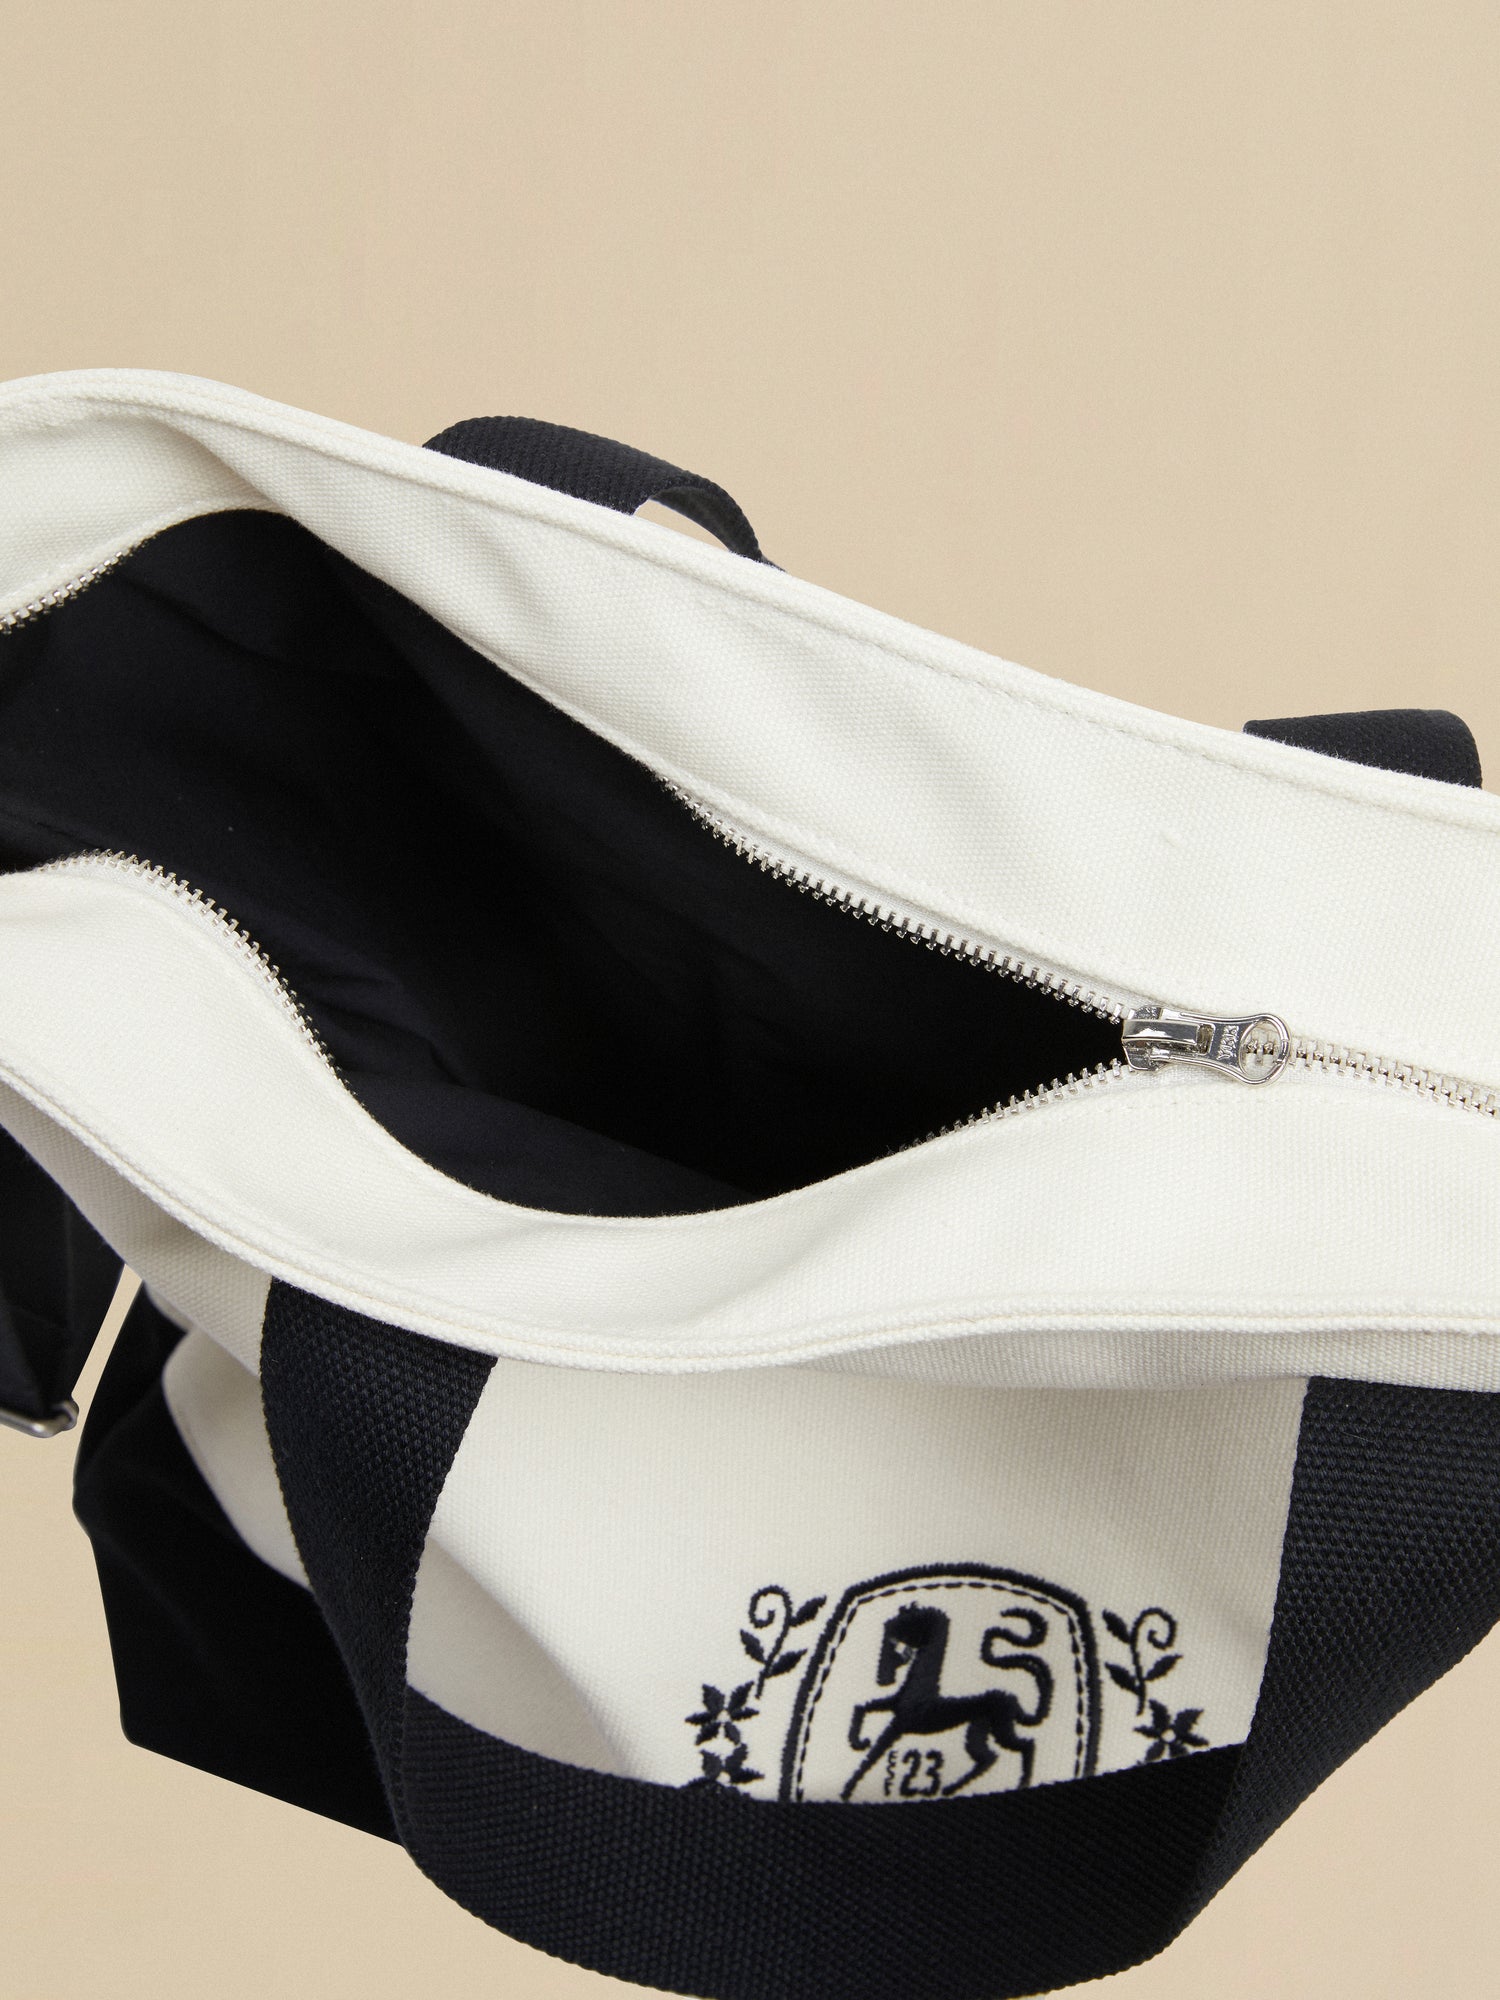 A white and black tote bag with the Profound horse logo crest on it.